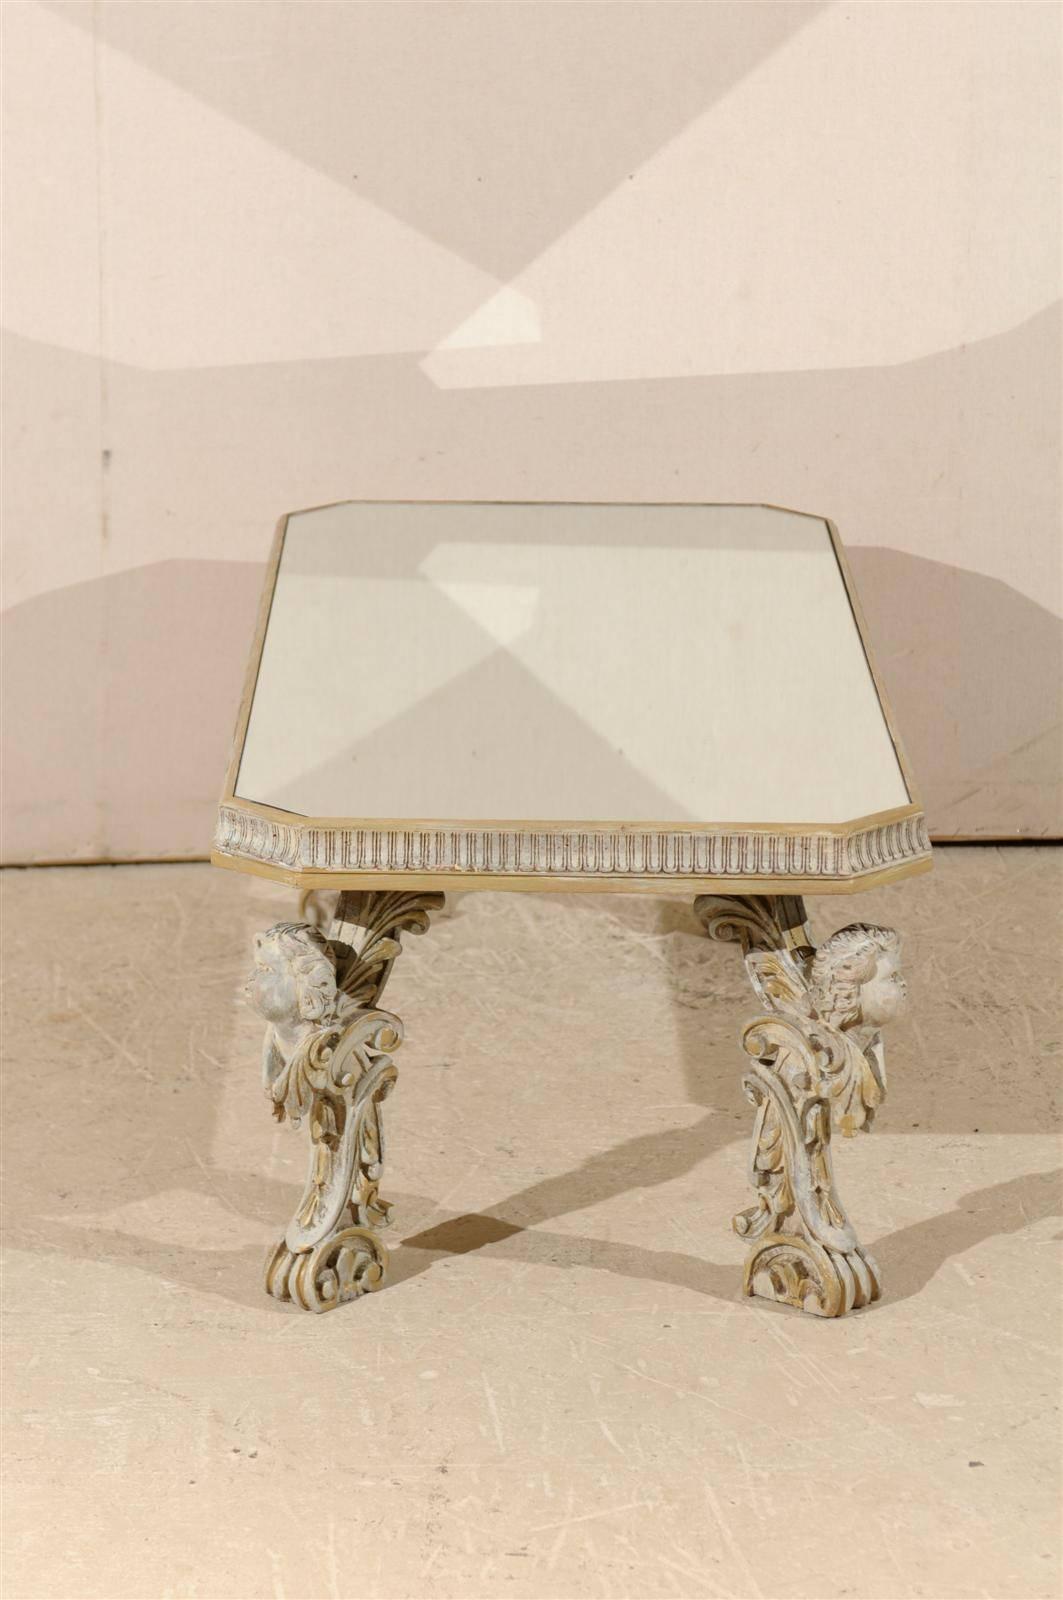 Wood Italian Mirrored Top Coffee Table with Ornate Putti Carved Legs, Circa 1920s For Sale